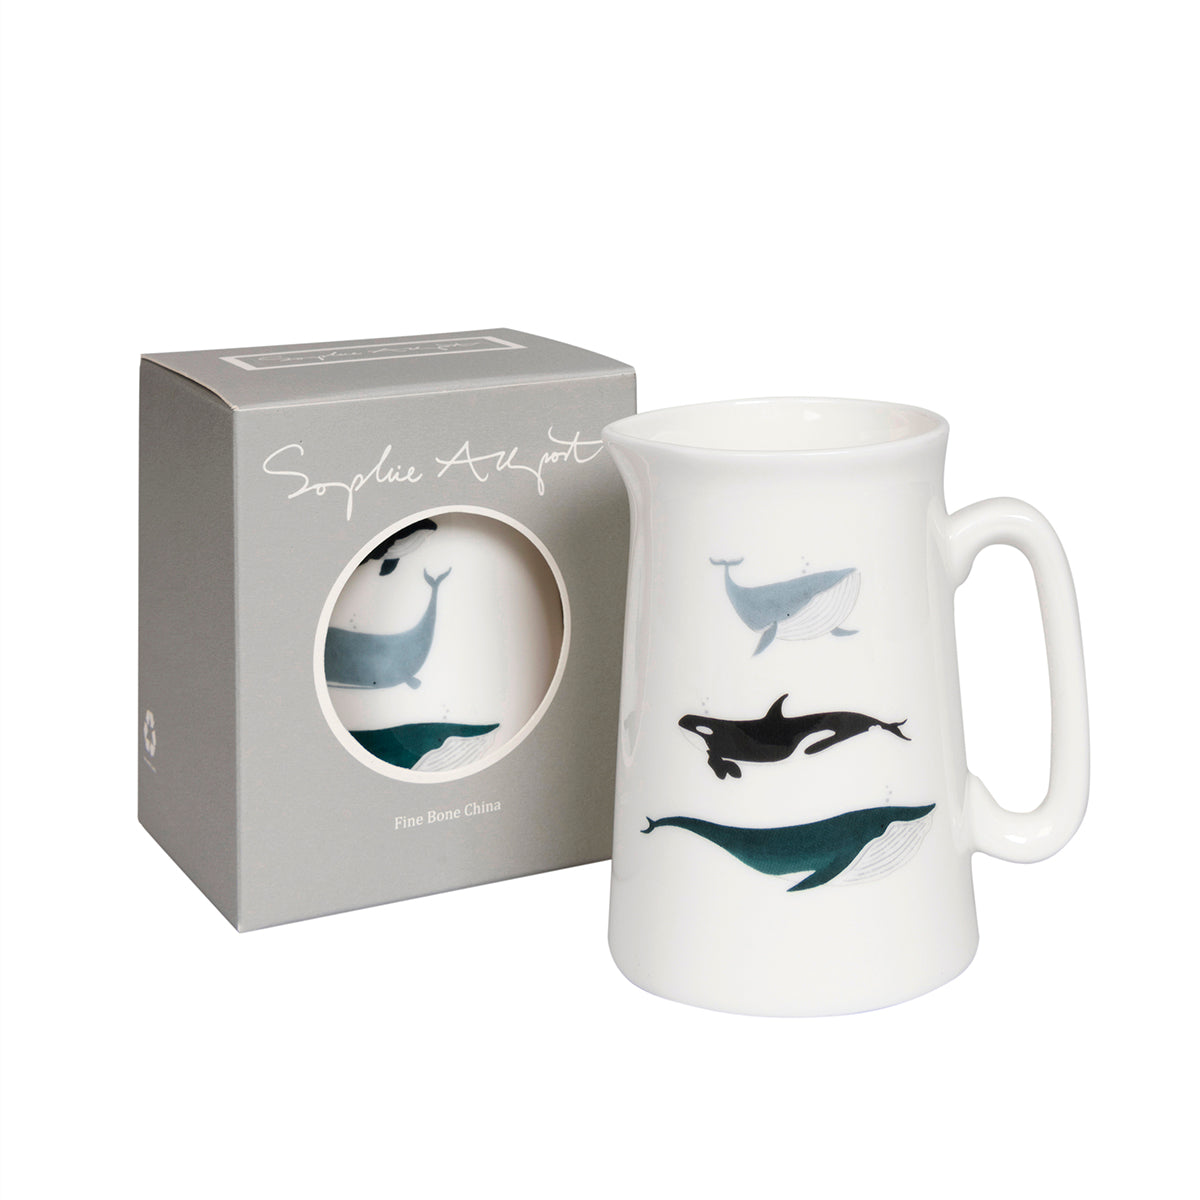 Whales Fine Bone China Jug Small by Sophie Allport